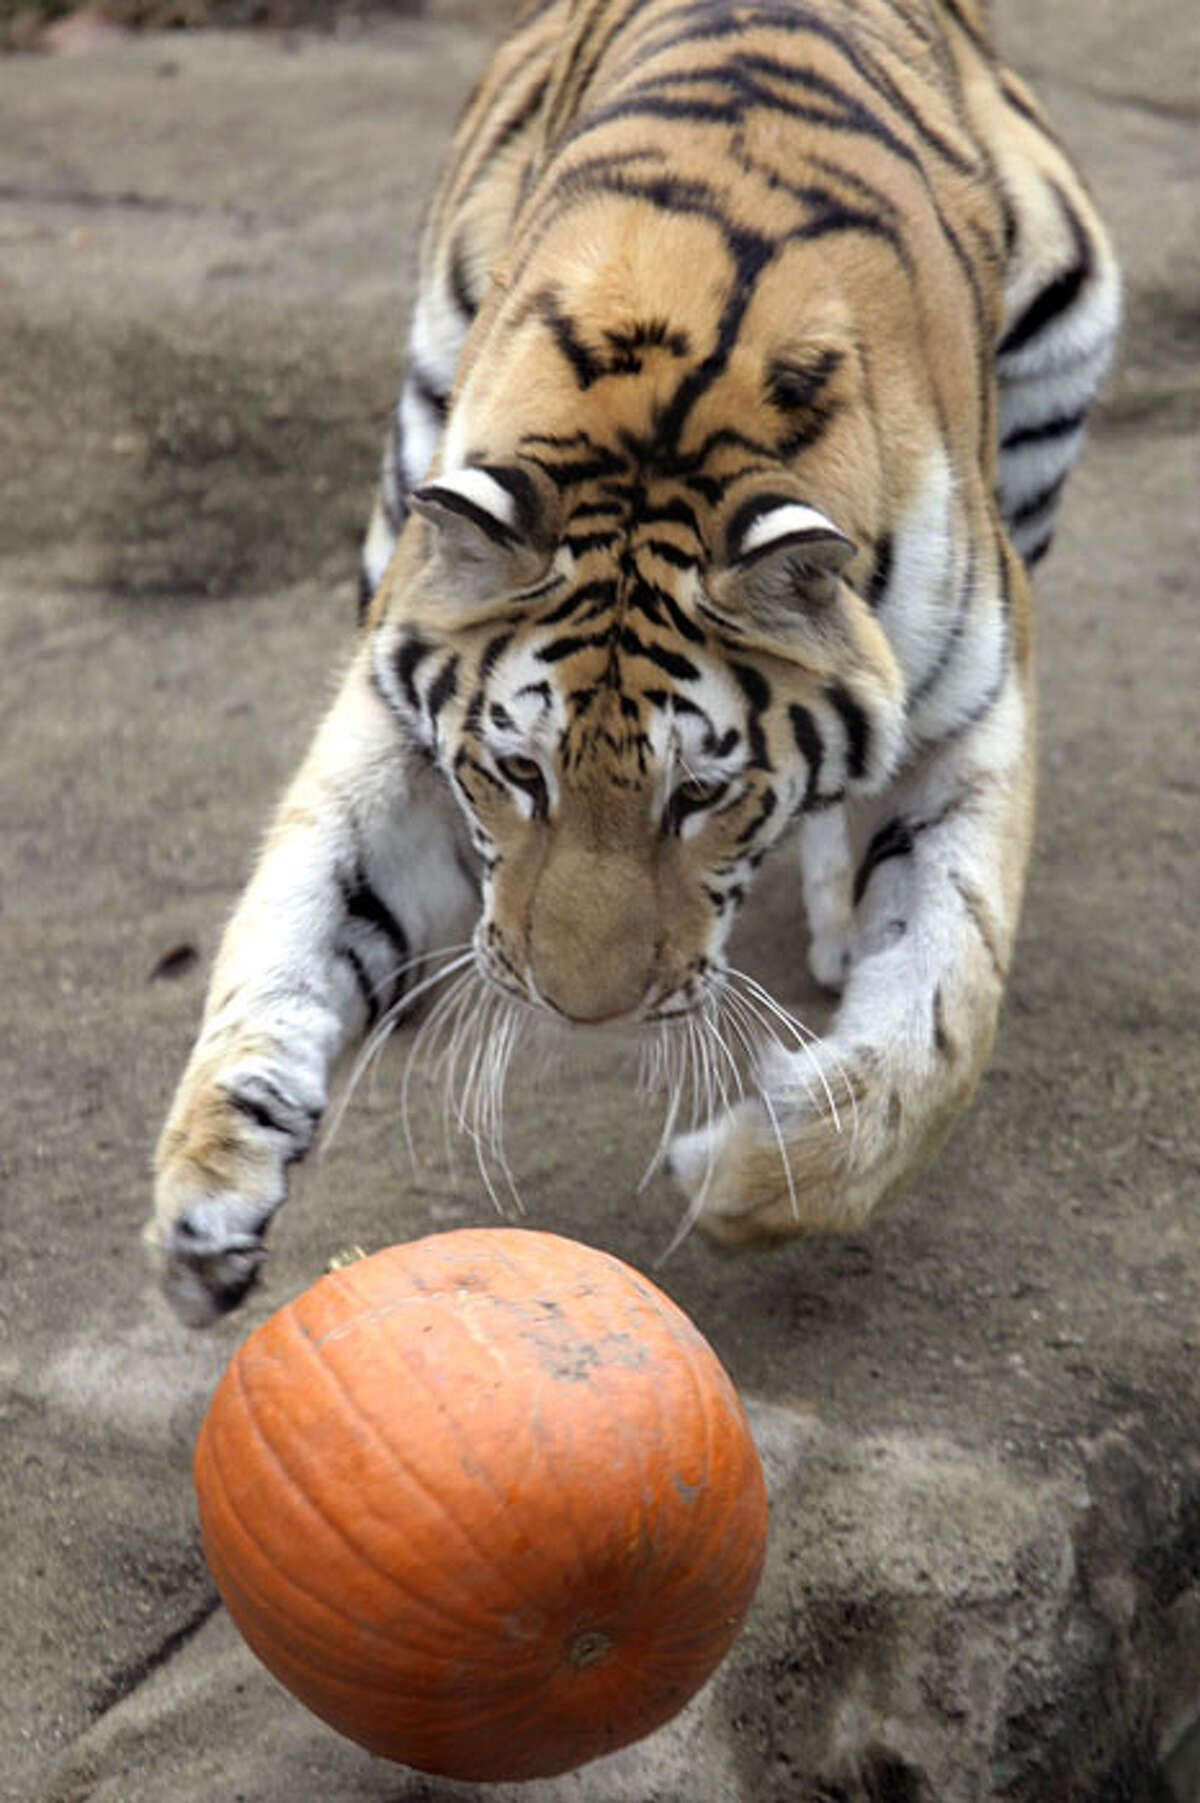 Whirl, a two-and-a-half-year-old Amur Tiger chases a pumpkin at Chicago Zoological Society's Brookfield Zoo in Brookfield, Ill. on Wednesday, Oct. 28, 2009. With the Halloween season upon us, several of the animals, including lions, tigers, polar bears, brown bears, and the gorillas, were given pumpkins to enjoy and play with as part of the zoowide behavioral enrichment program.